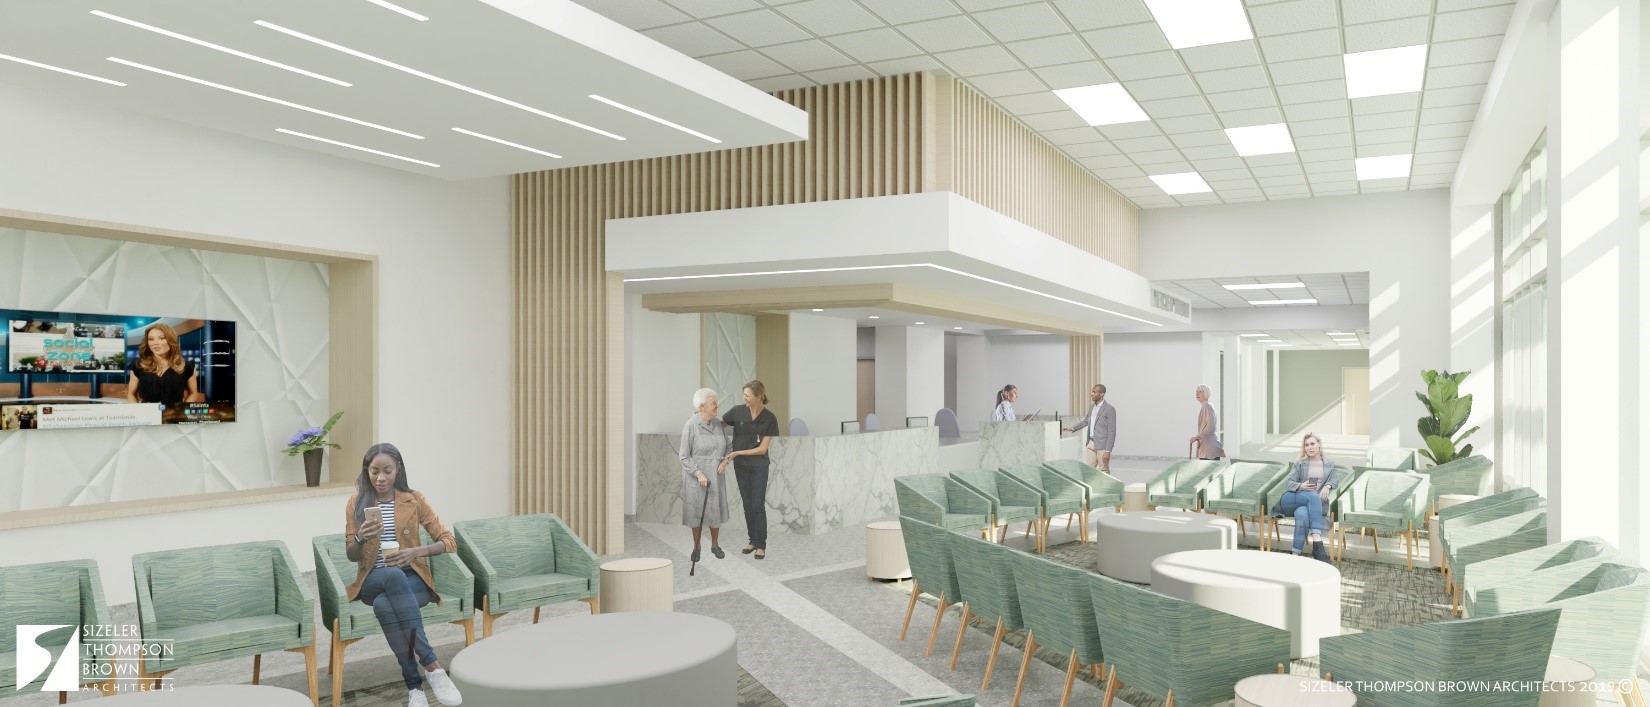 State of the Art Emergency Department Rendering